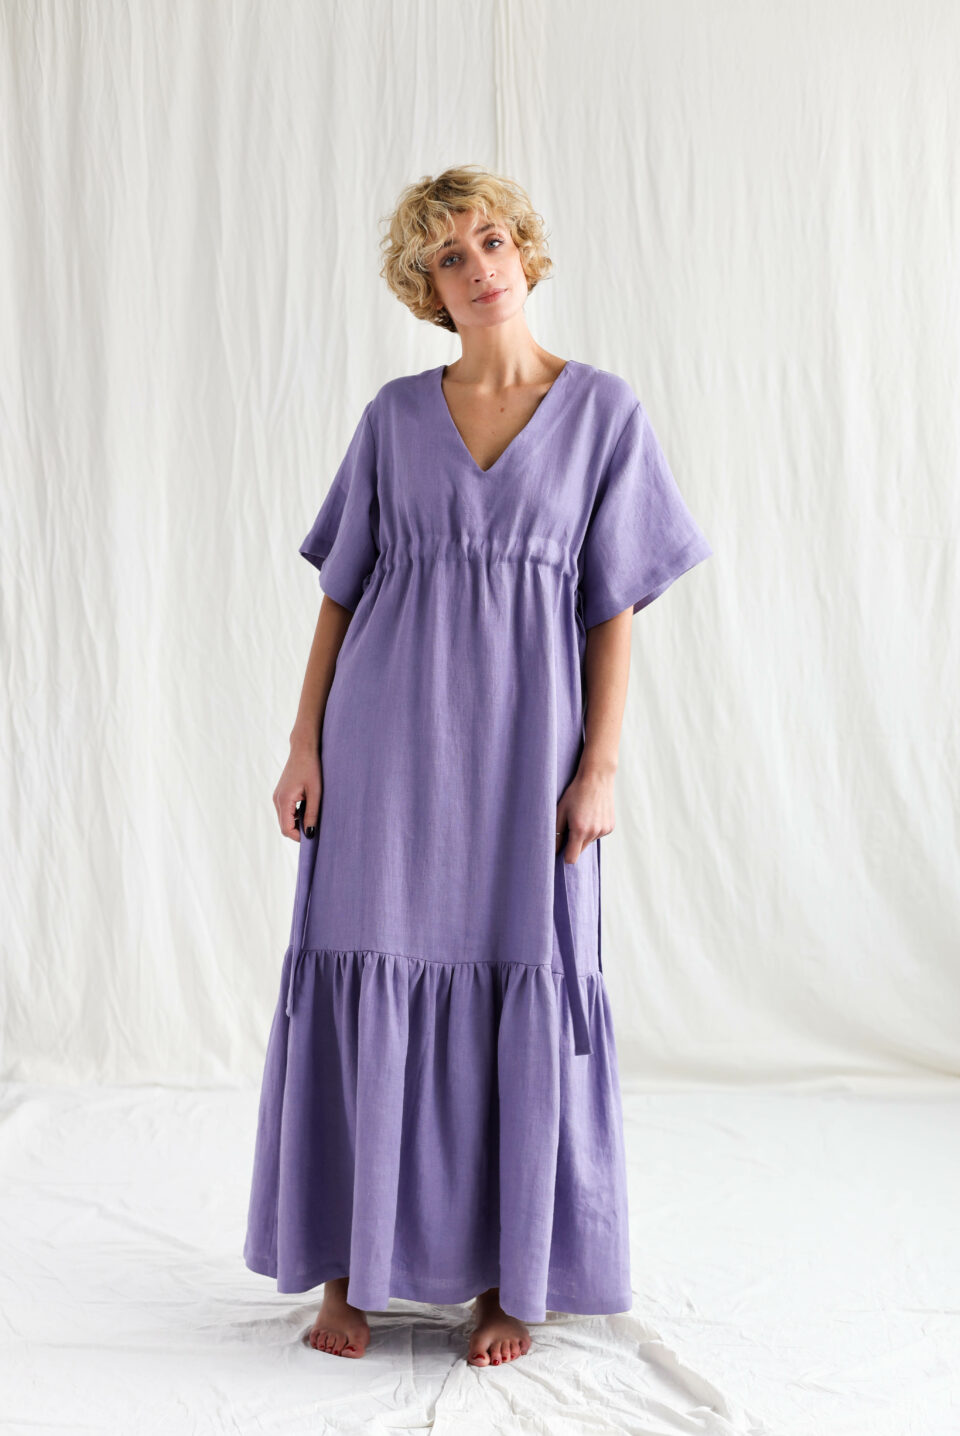 Lavender linen maxi dress with adjustable waist ties | Dress | Lavender | Sustainable clothing | OffOn clothing